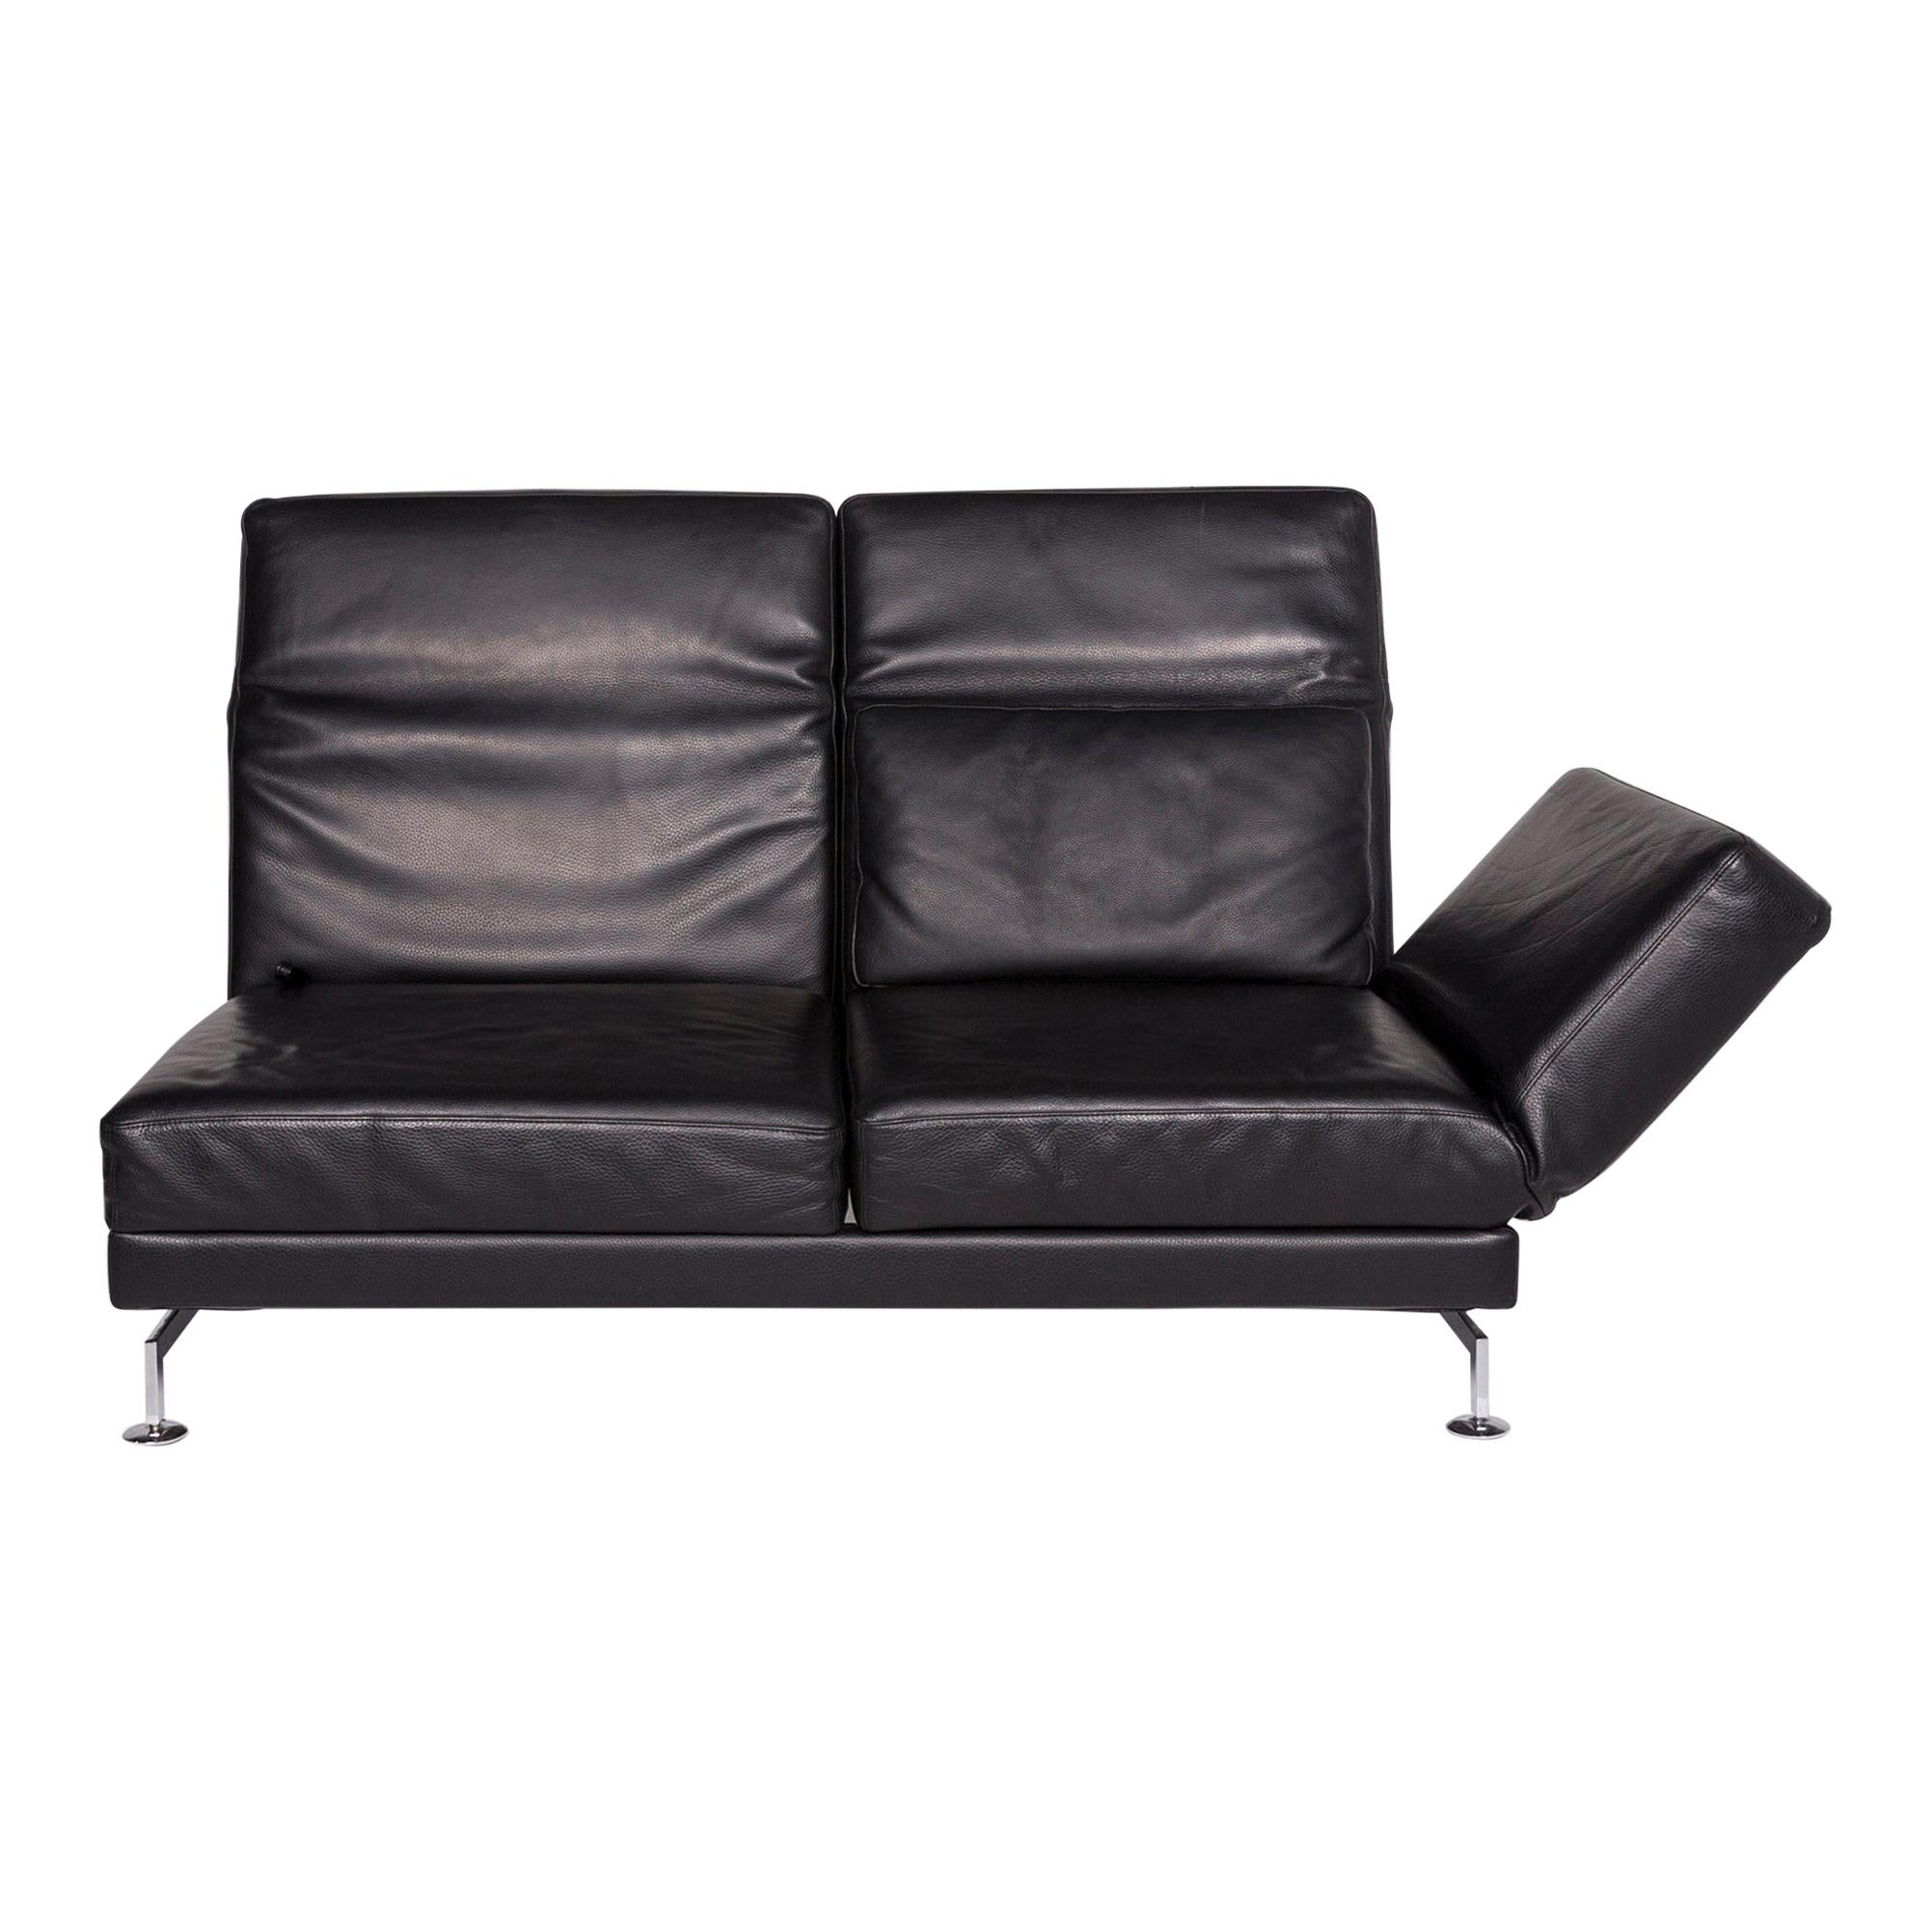 Brühl & Sippold Moule Leather Sofa Black Two-Seat Relax Function Couch For Sale